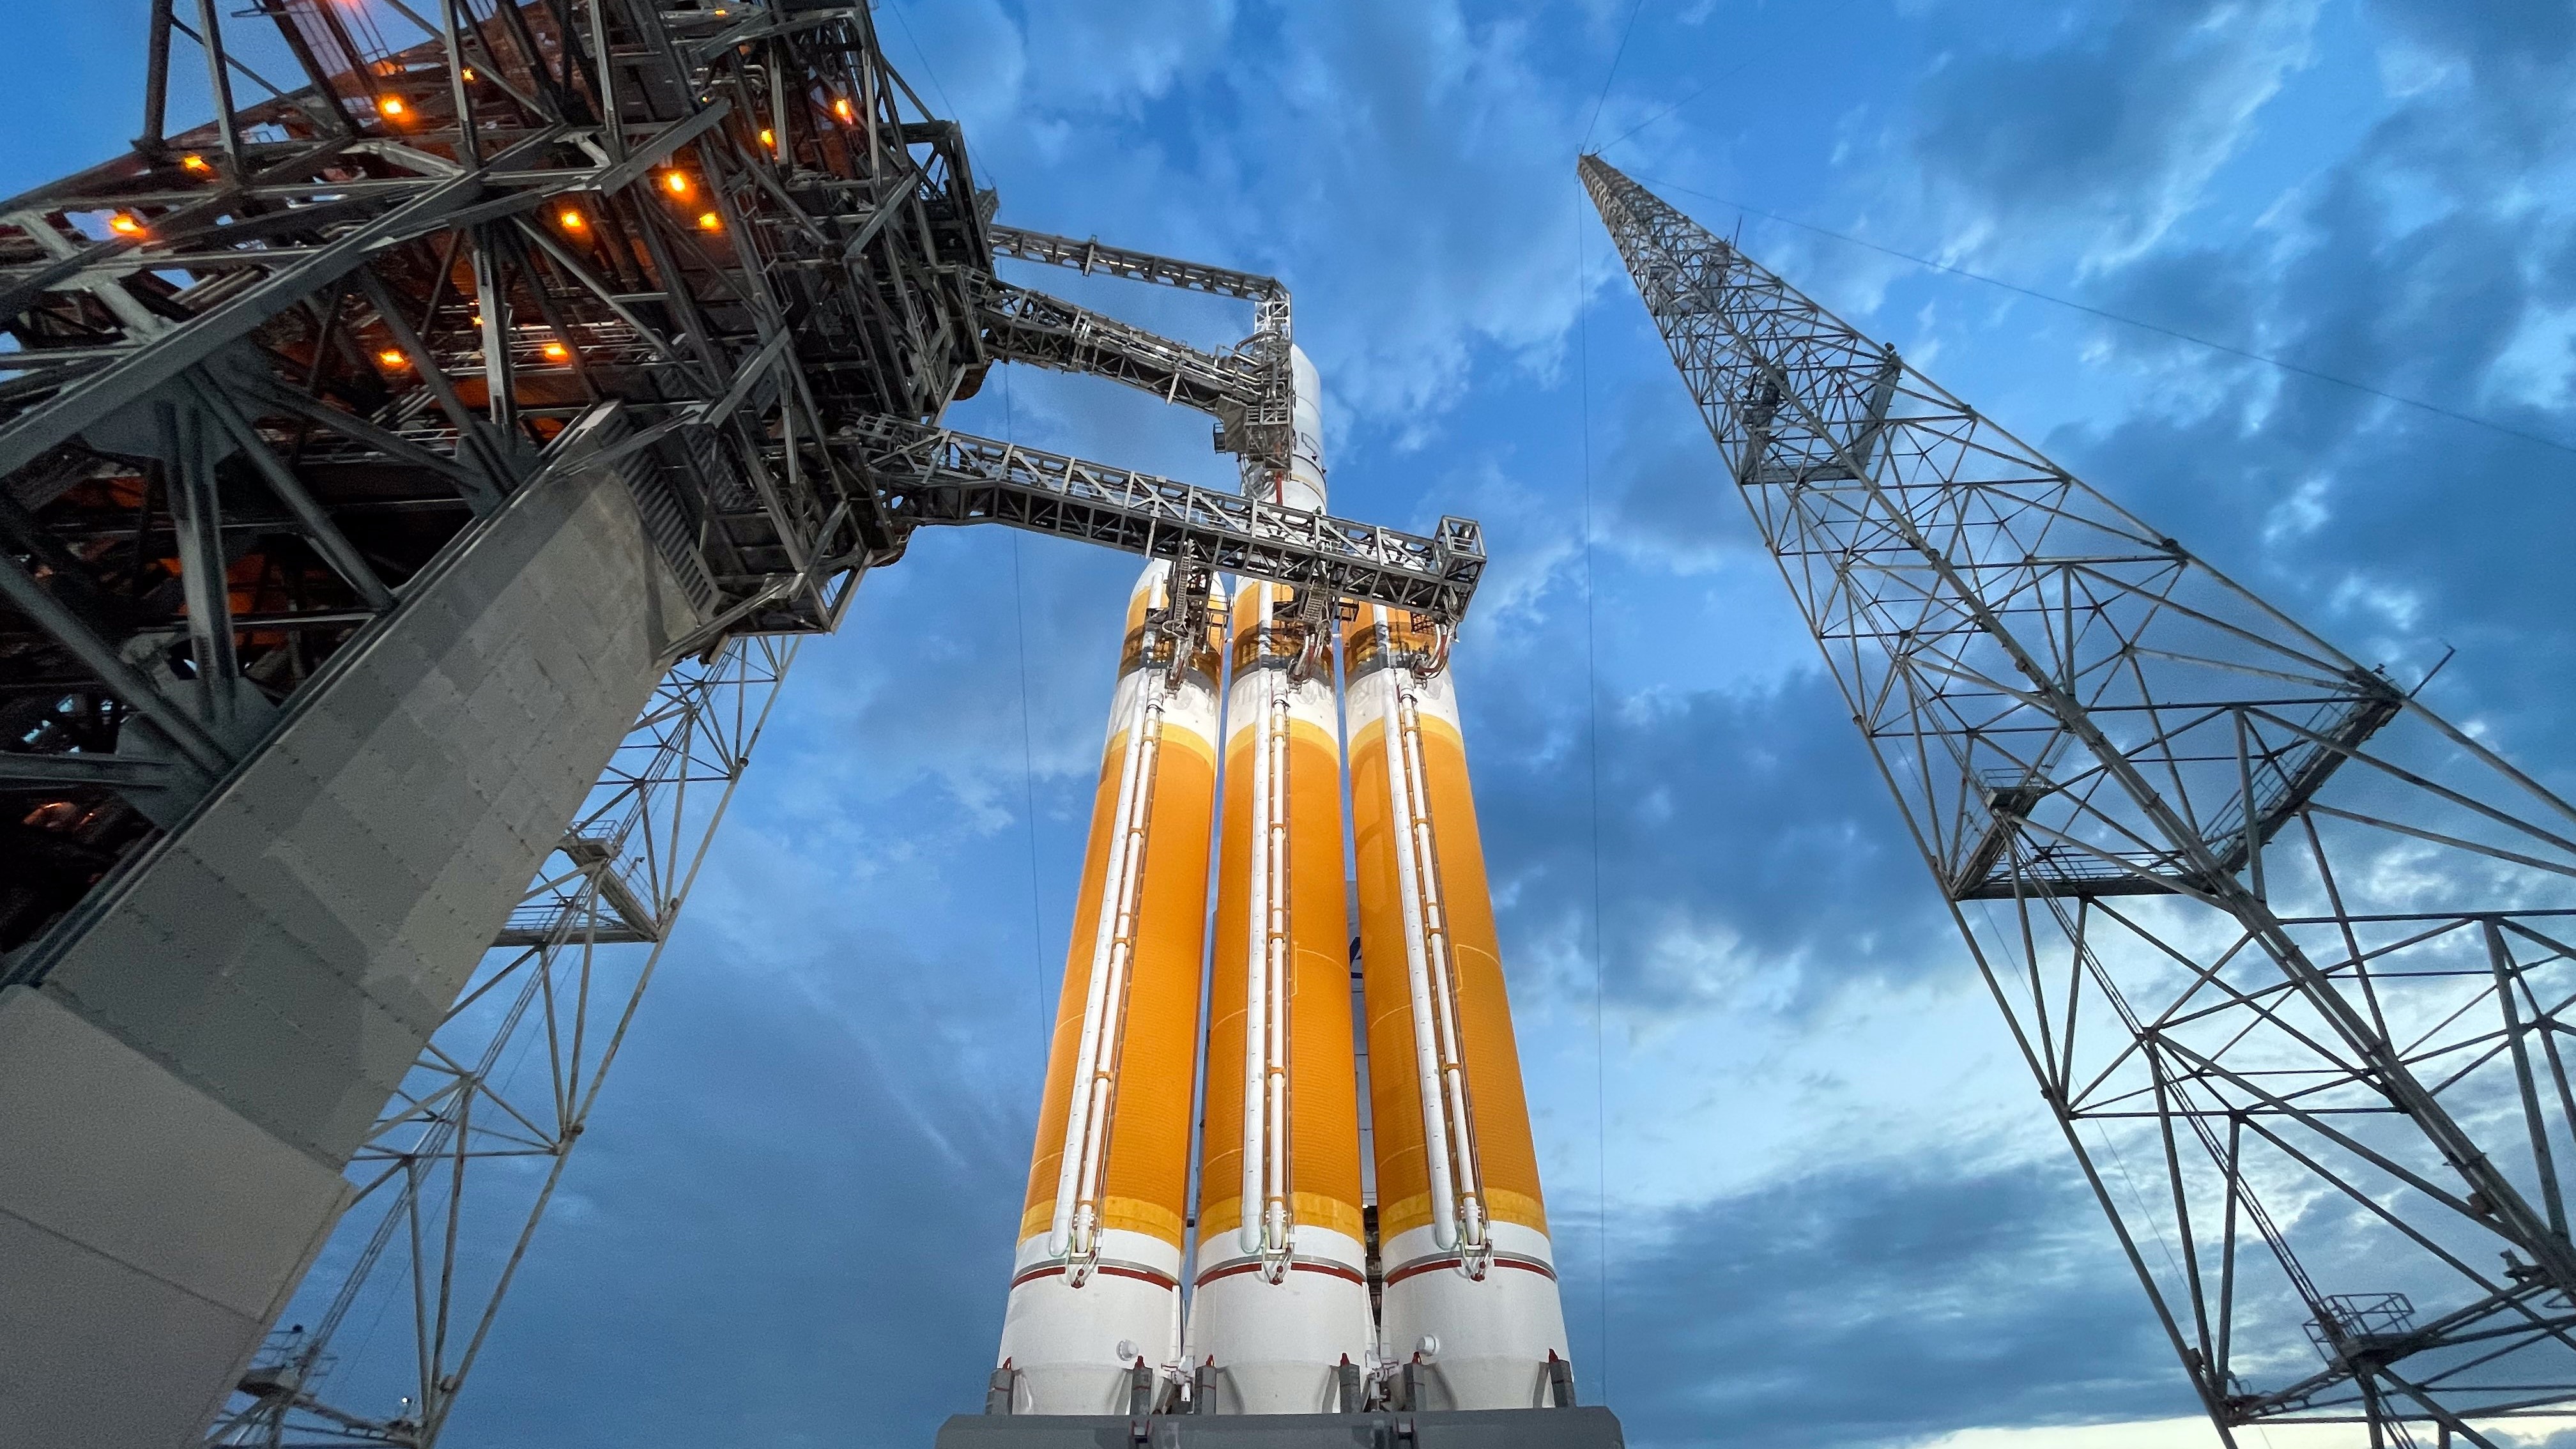 Final Delta IV Heavy rocket launch scrubbed just before liftoff